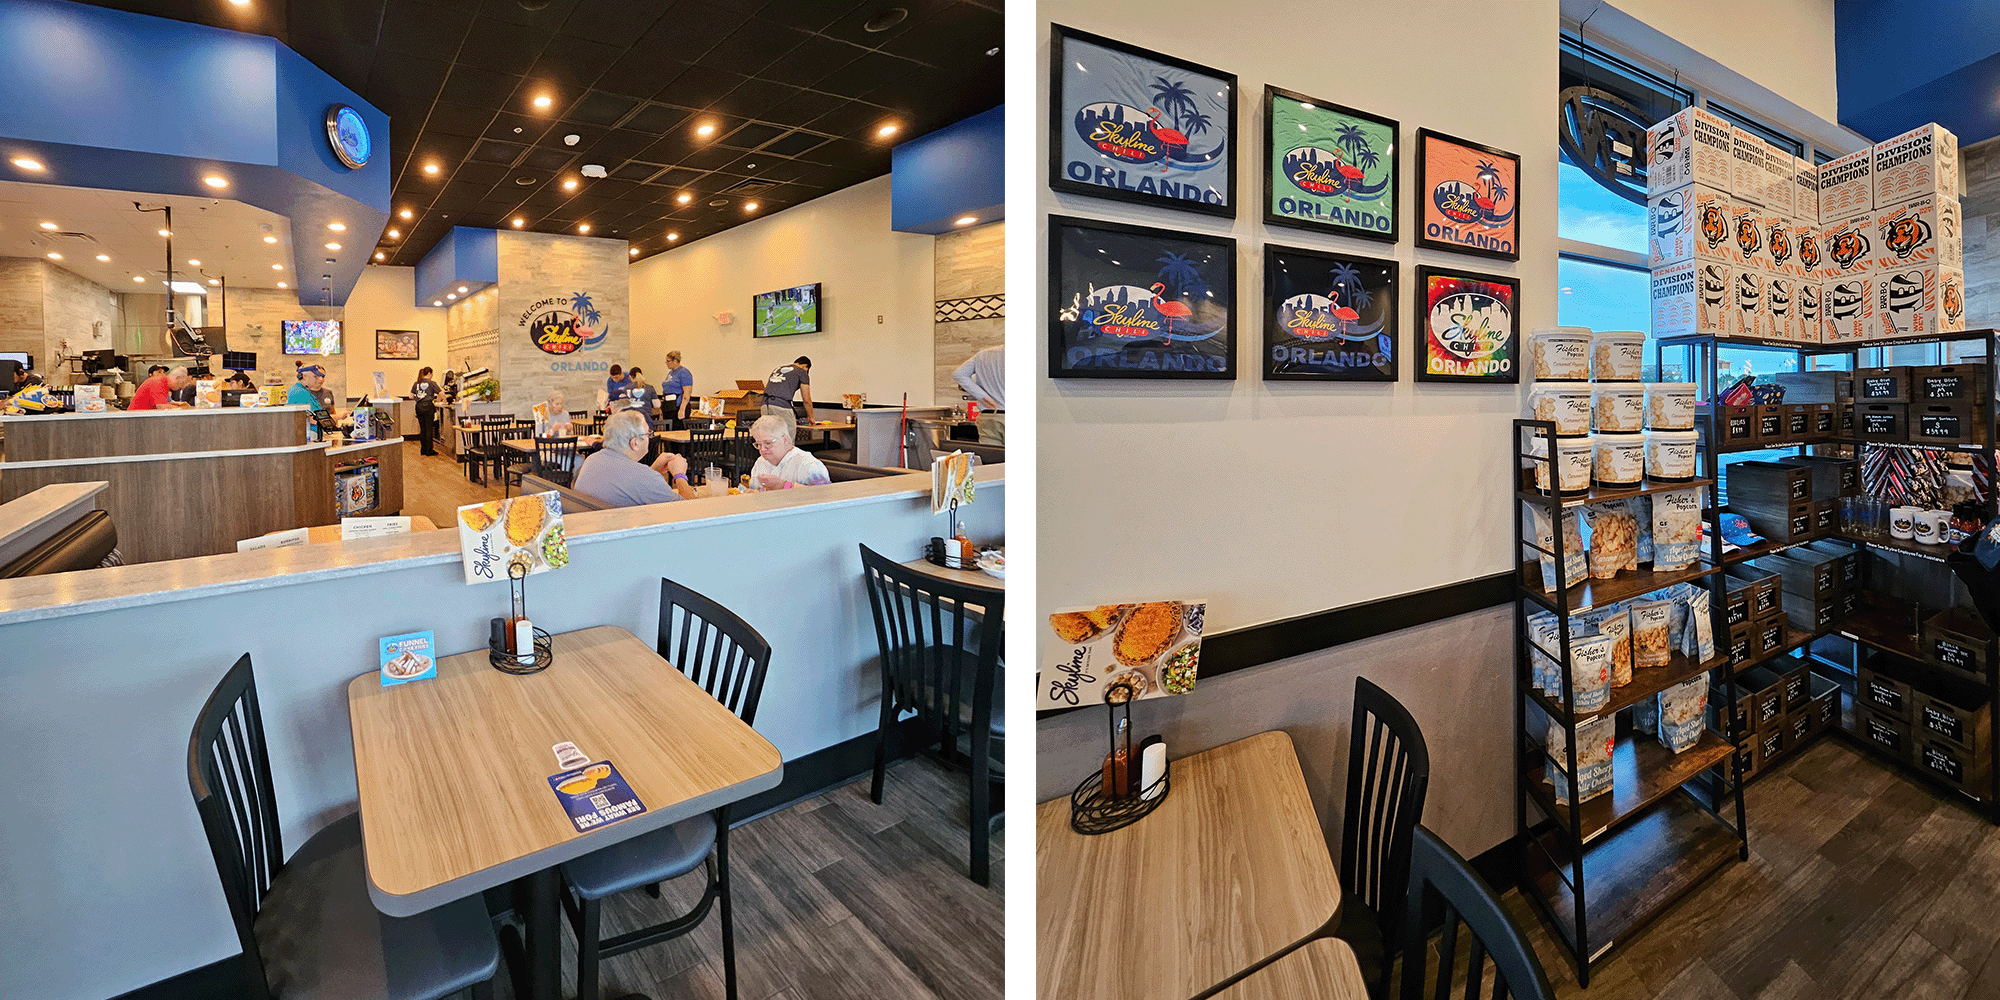 two images with inside of restaurant and merchandise with logo